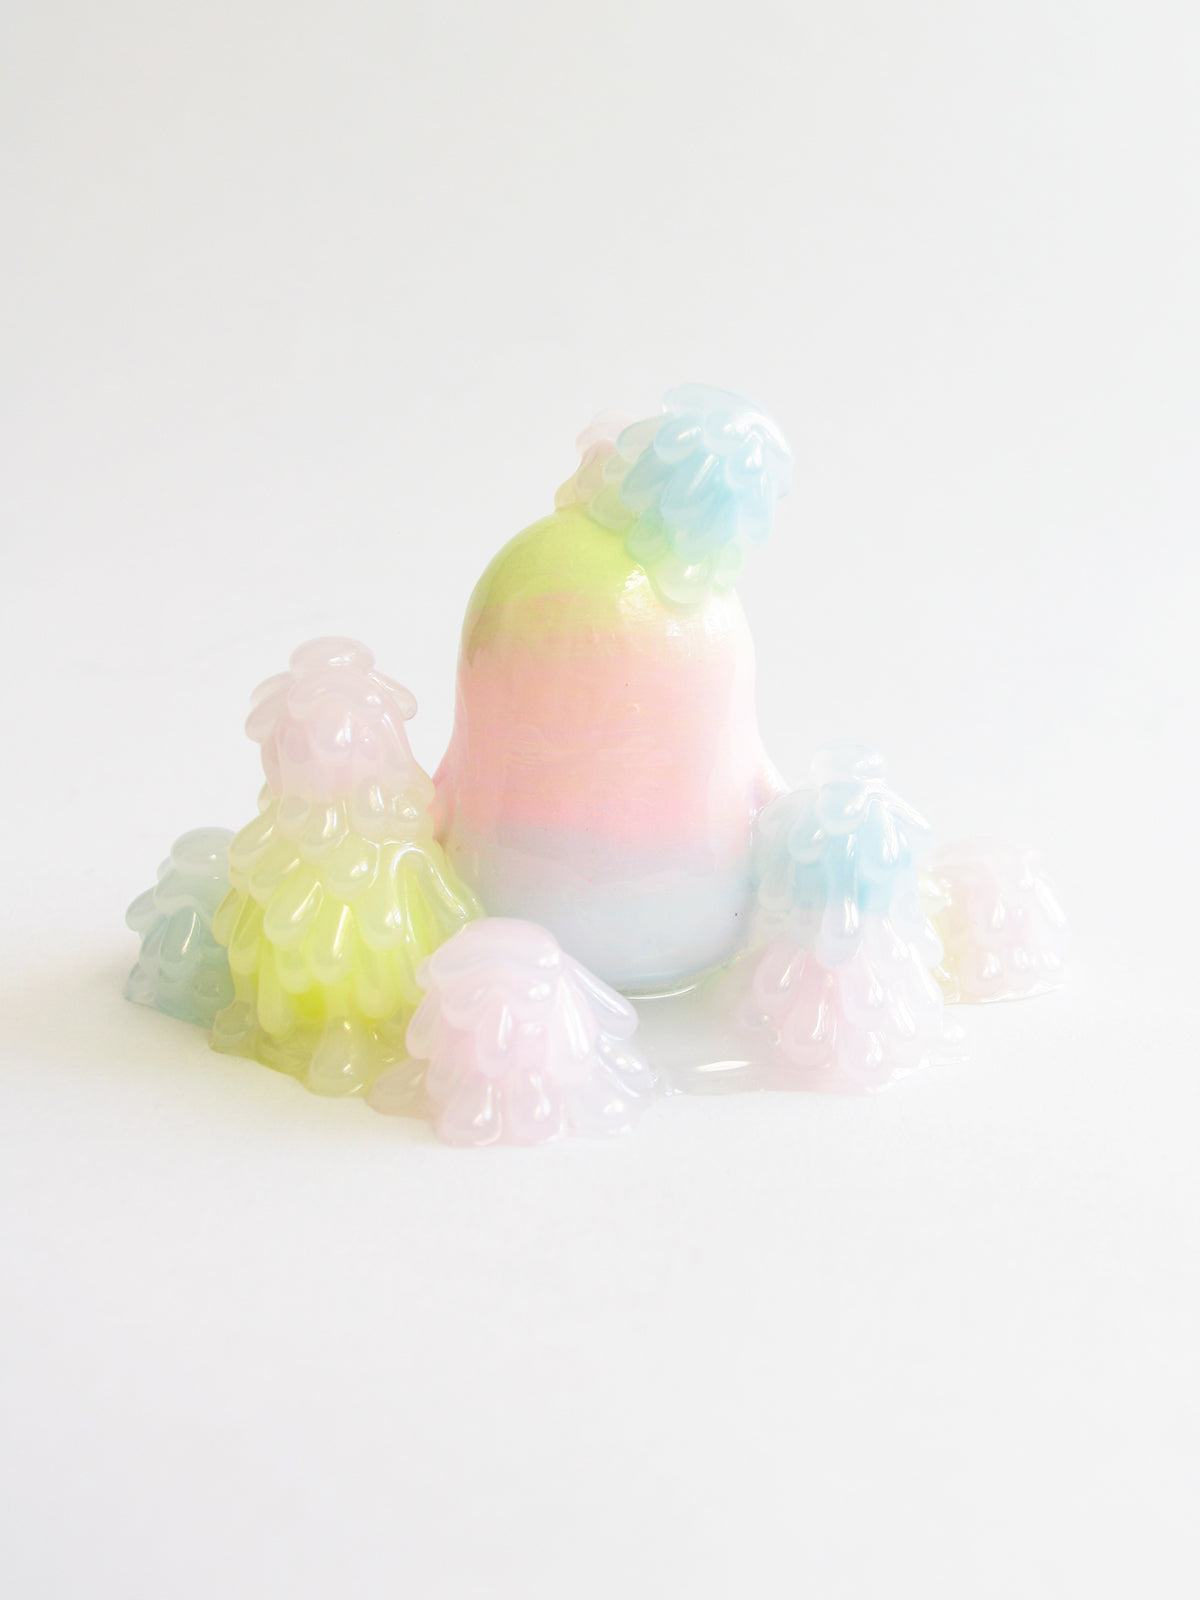 Cotton Candy Clusters by Brigitte Coovert